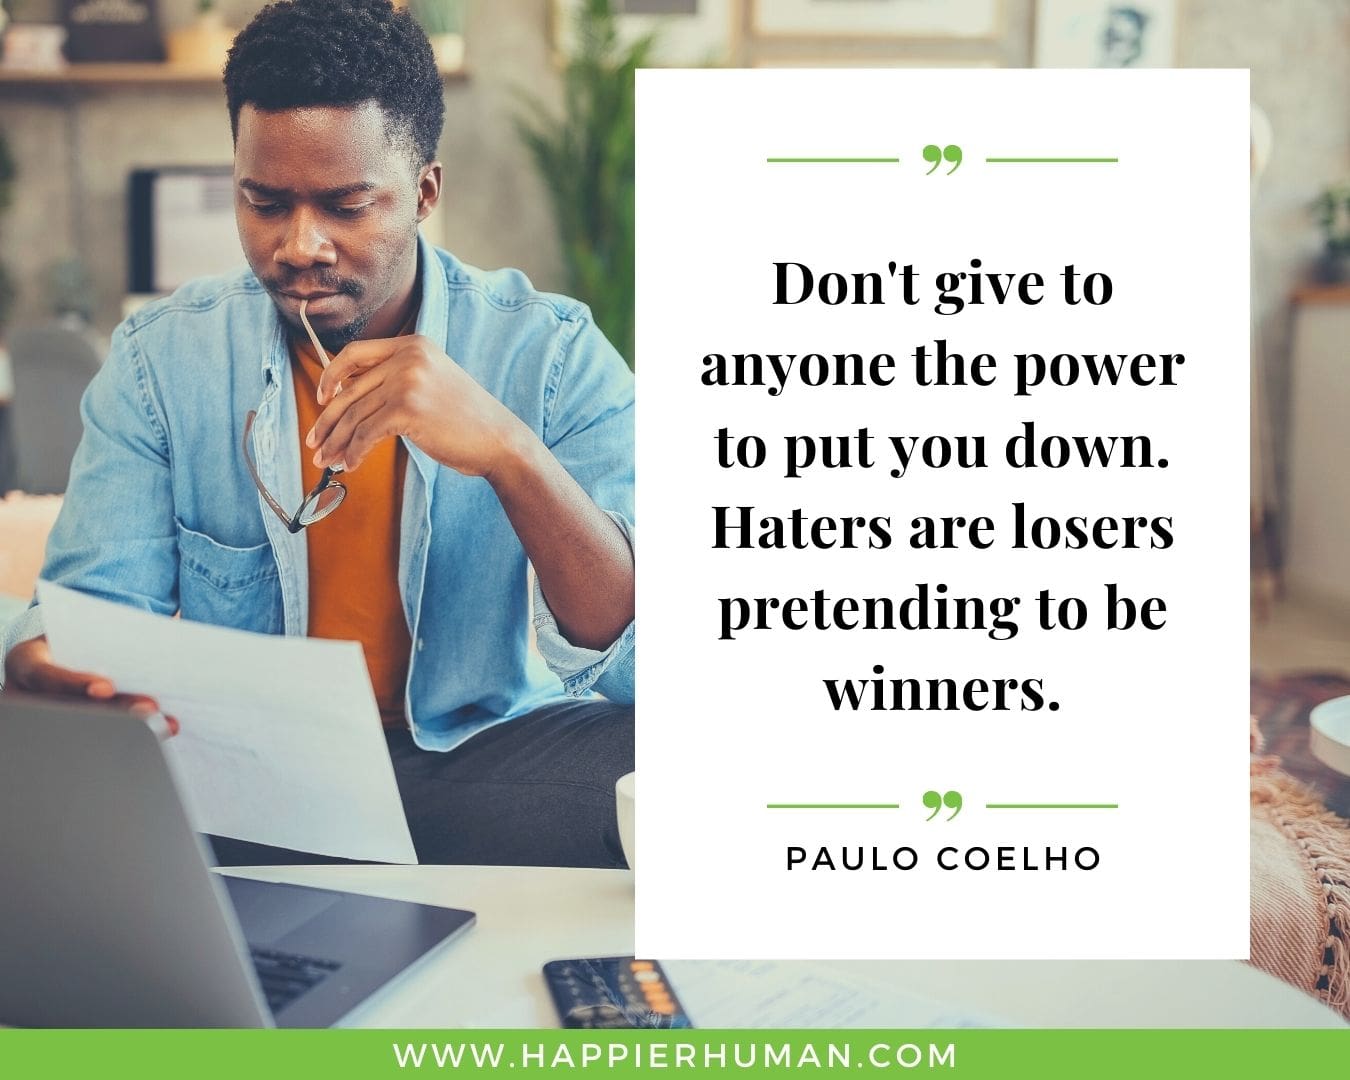 Haters Quotes - “Don't give to anyone the power to put you down. Haters are losers pretending to be winners.” - Paulo Coelho